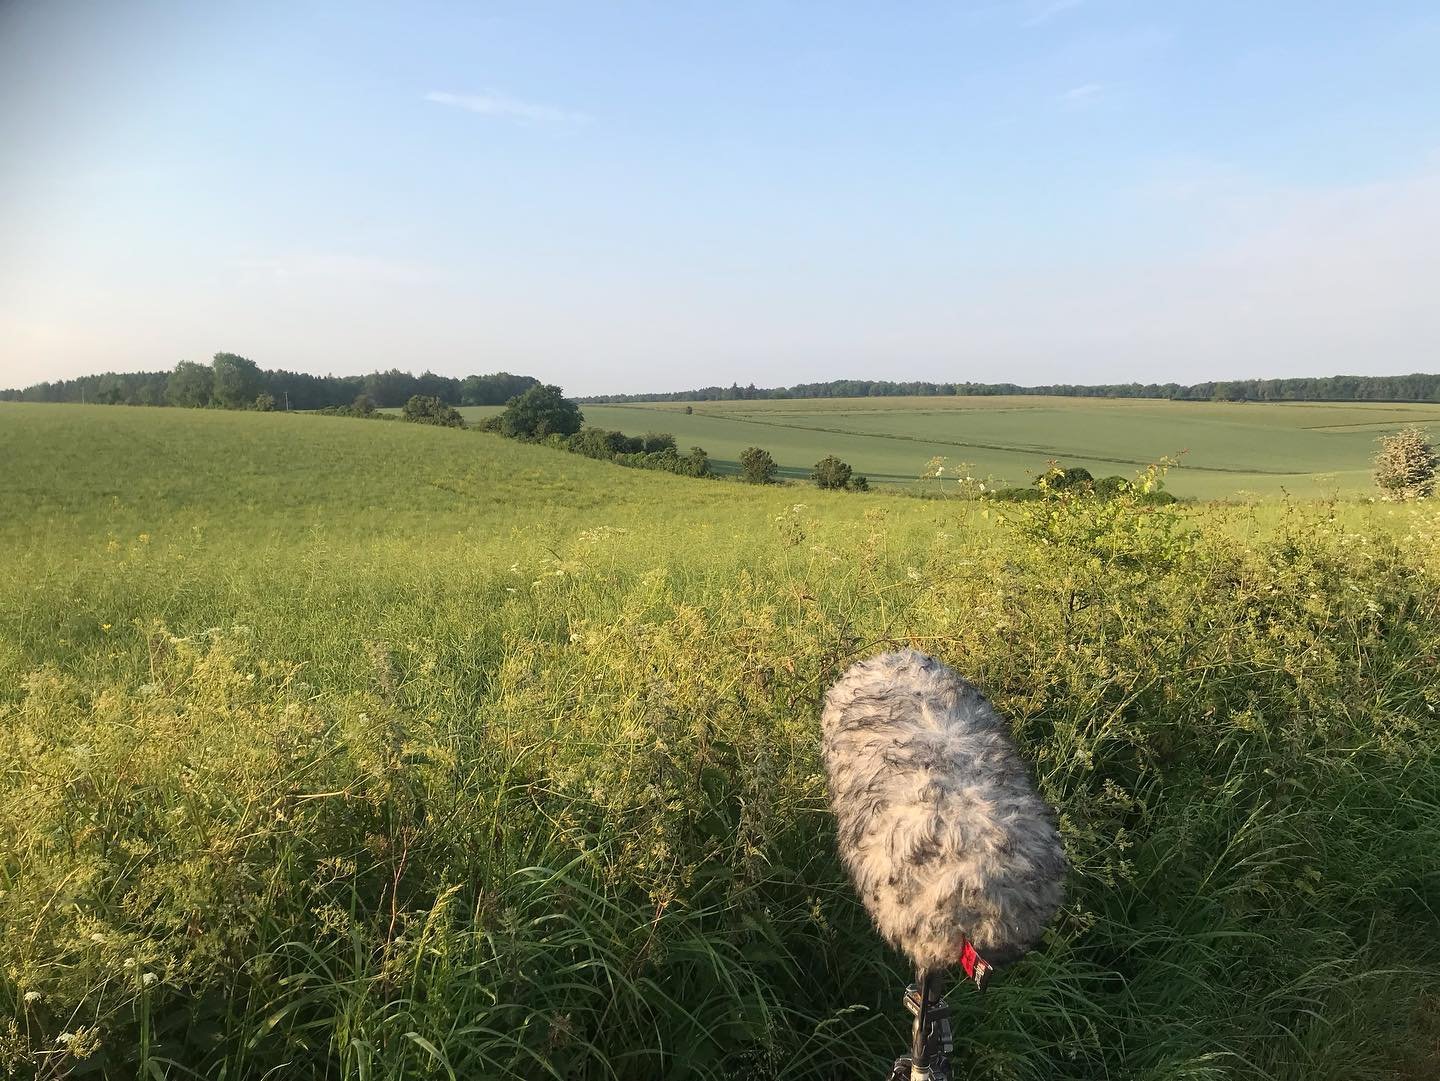 Recording Skylarks (and an ✈️ or 2) for the @britishlibrary &lsquo;Larks Ascending&rsquo; call for sounds in collaboration with @wildlife_sound. The first song heard at 3h04am ➡️ sound on for last slide 🎶

#fieldrecording #wildlifesound #locationsou